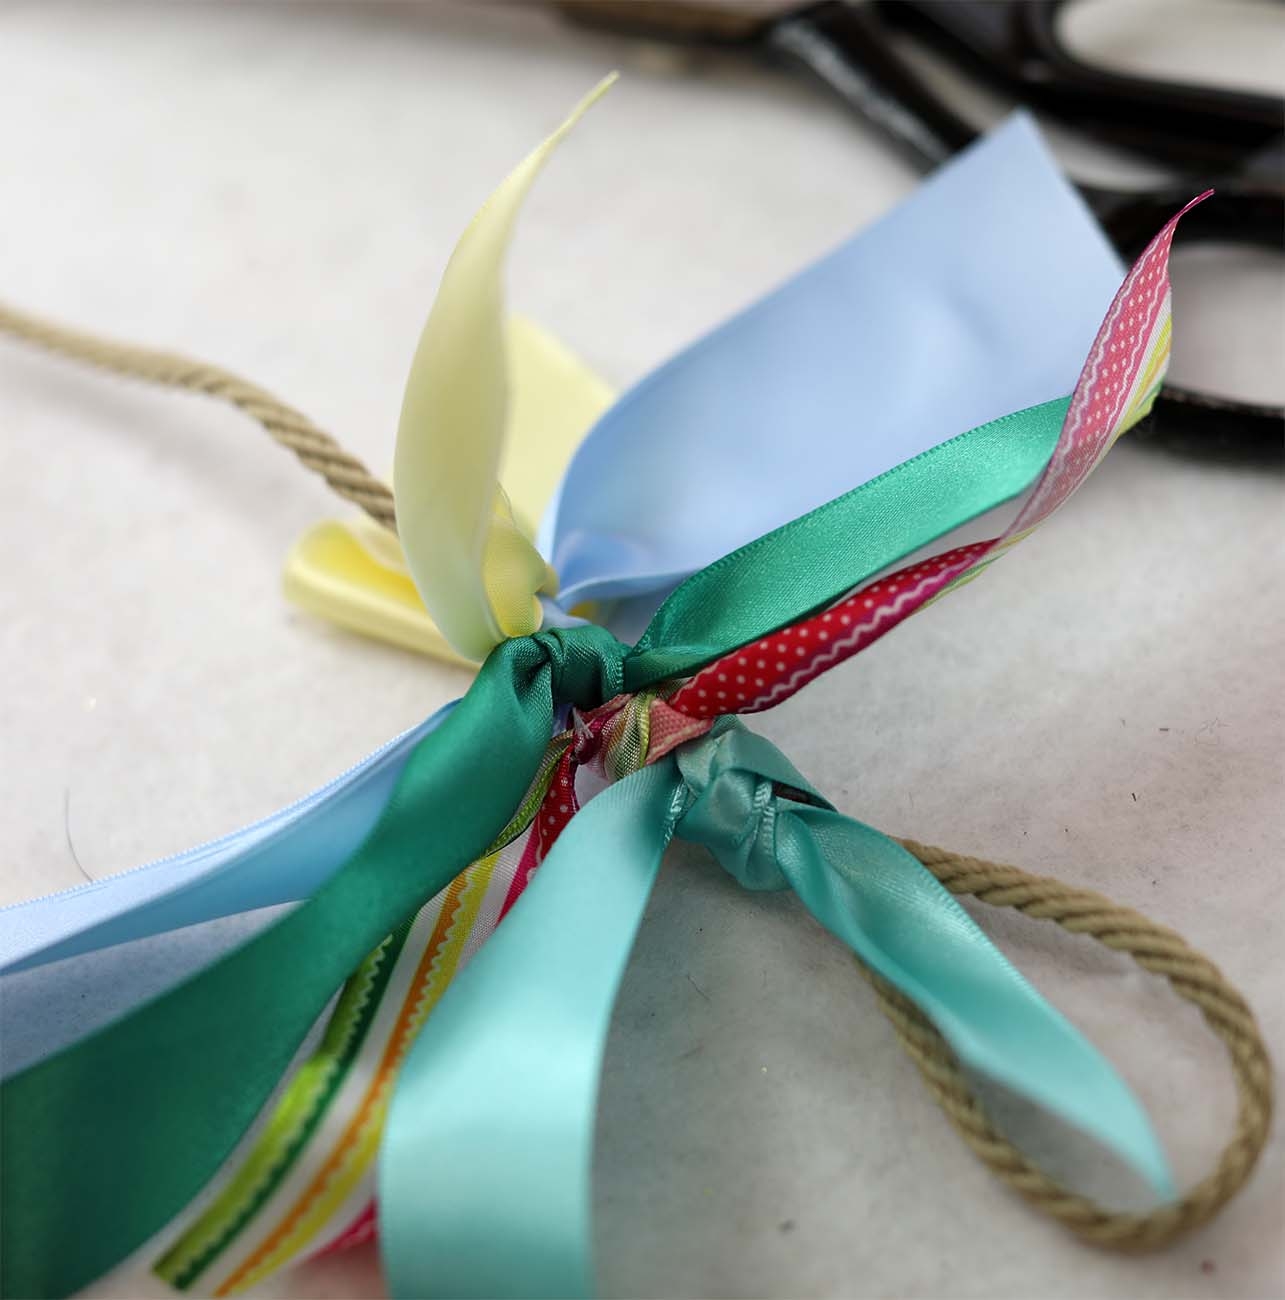 Knotted ribbons on the garland